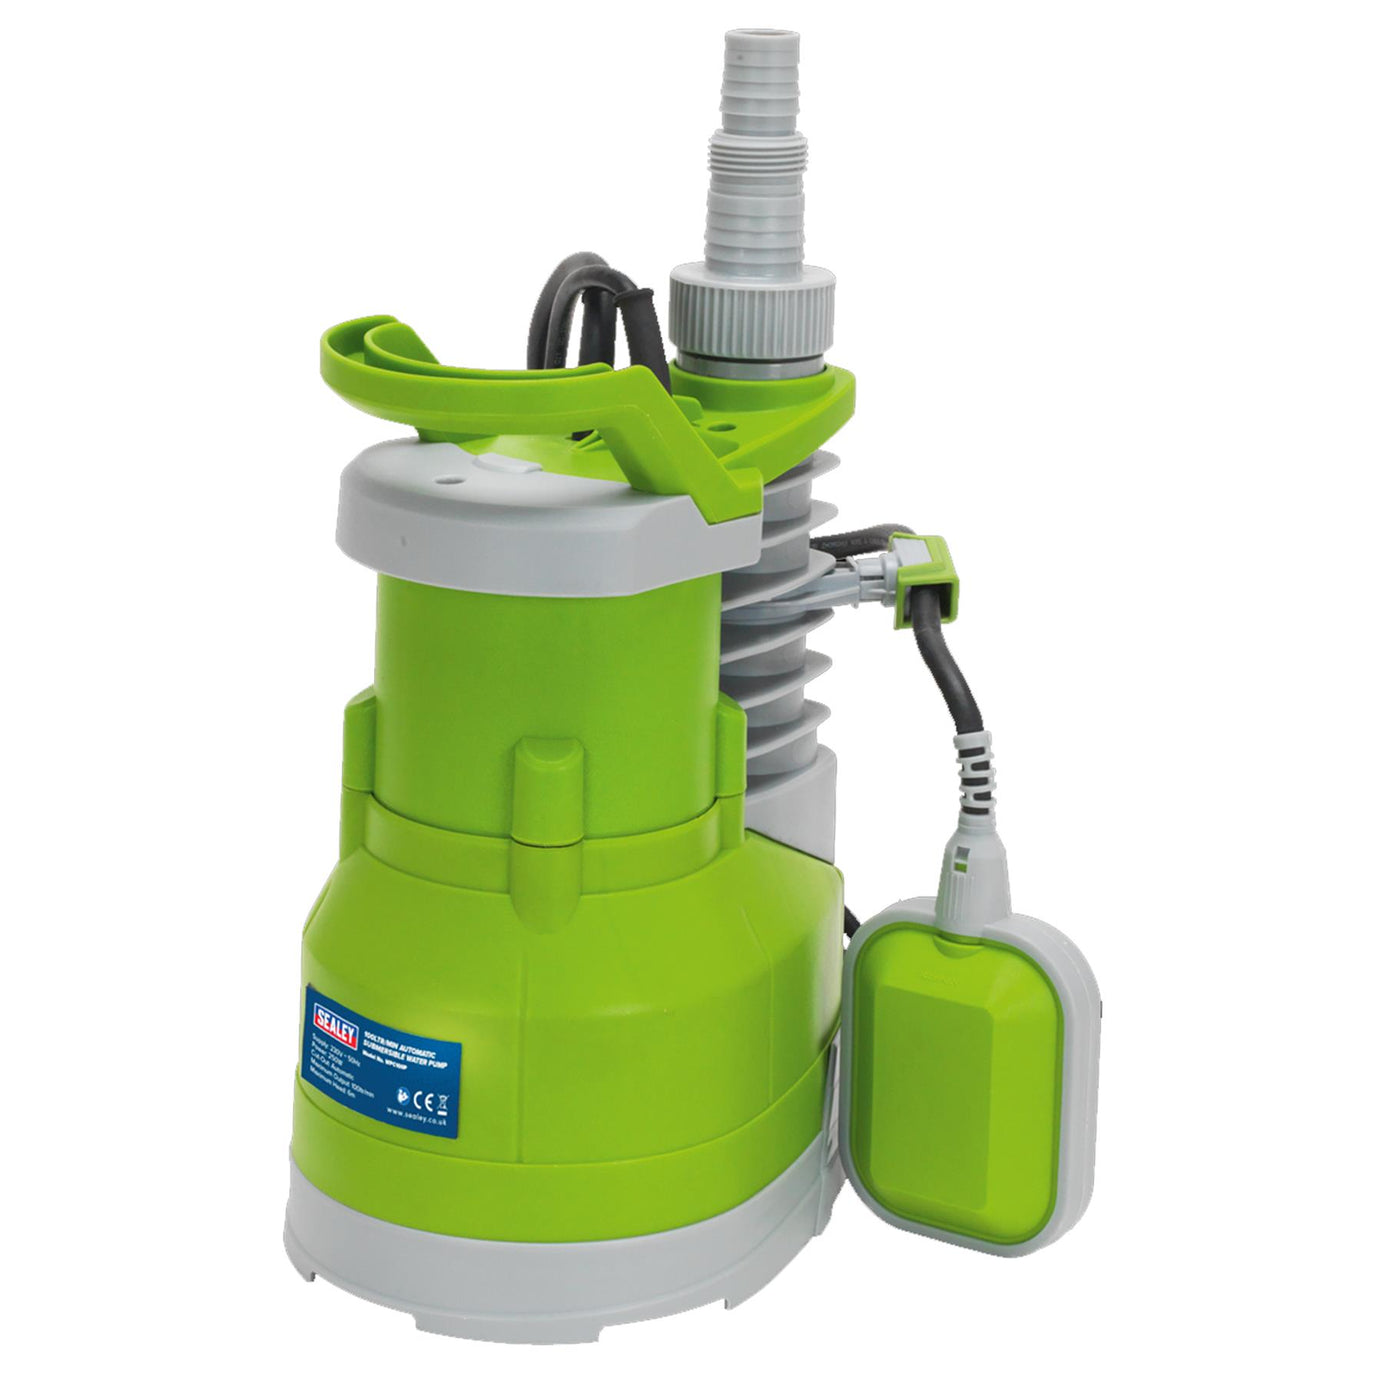 Submersible Clean Water Pump Automatic 100L/min 230V Sealey